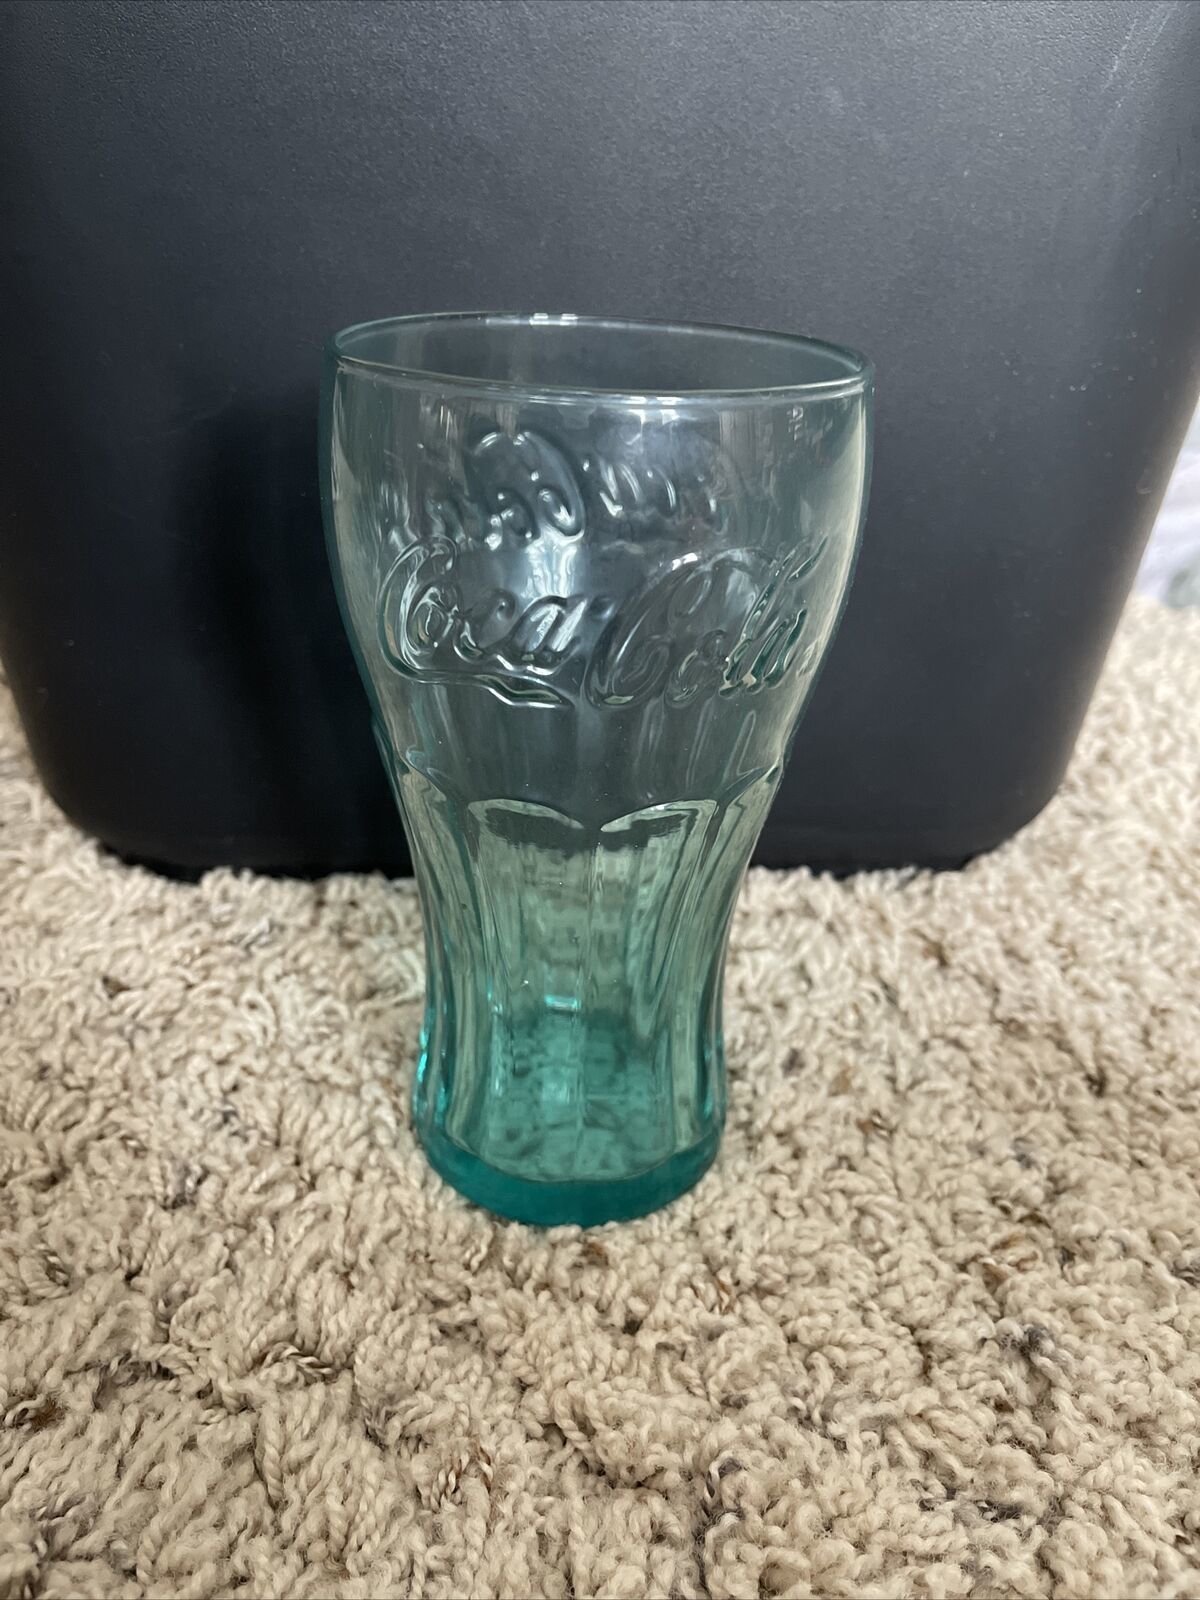 Primary image for Coca Cola Embossed Blue Teal Tint 16 Oz Drinking Glass Tumbler